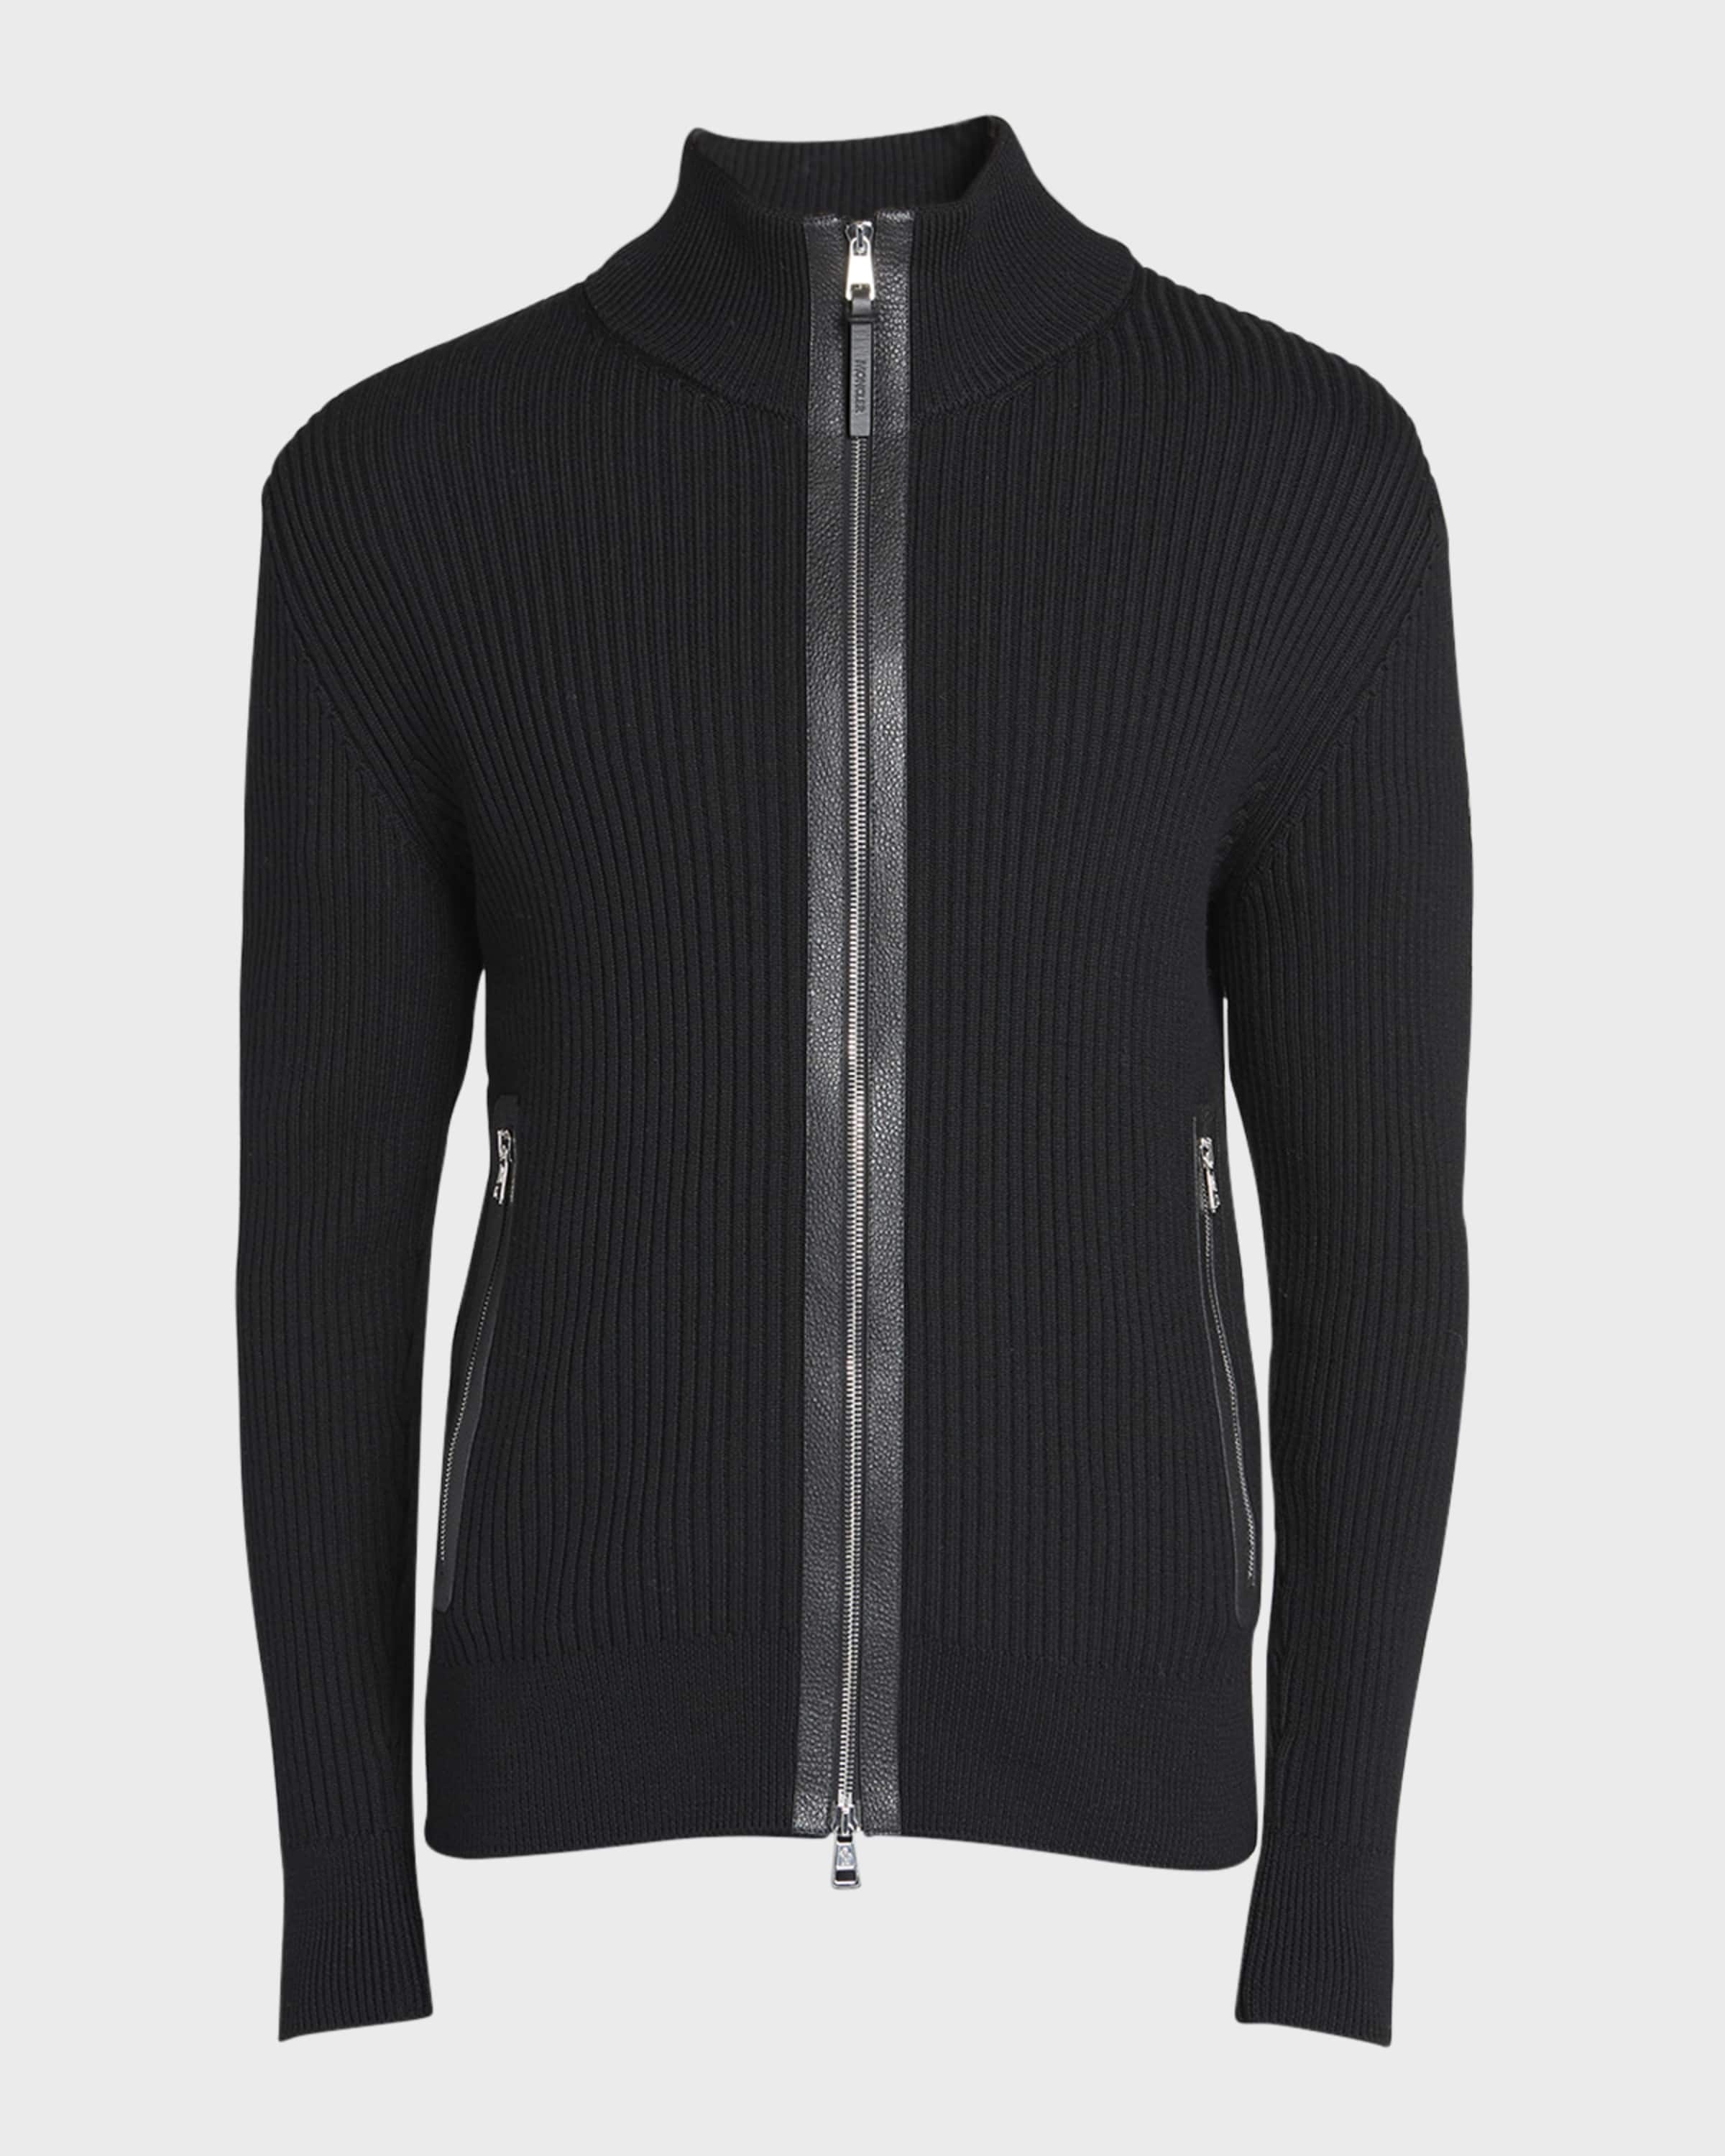 Men's Ribbed Cardigan with Leather Trim - 1